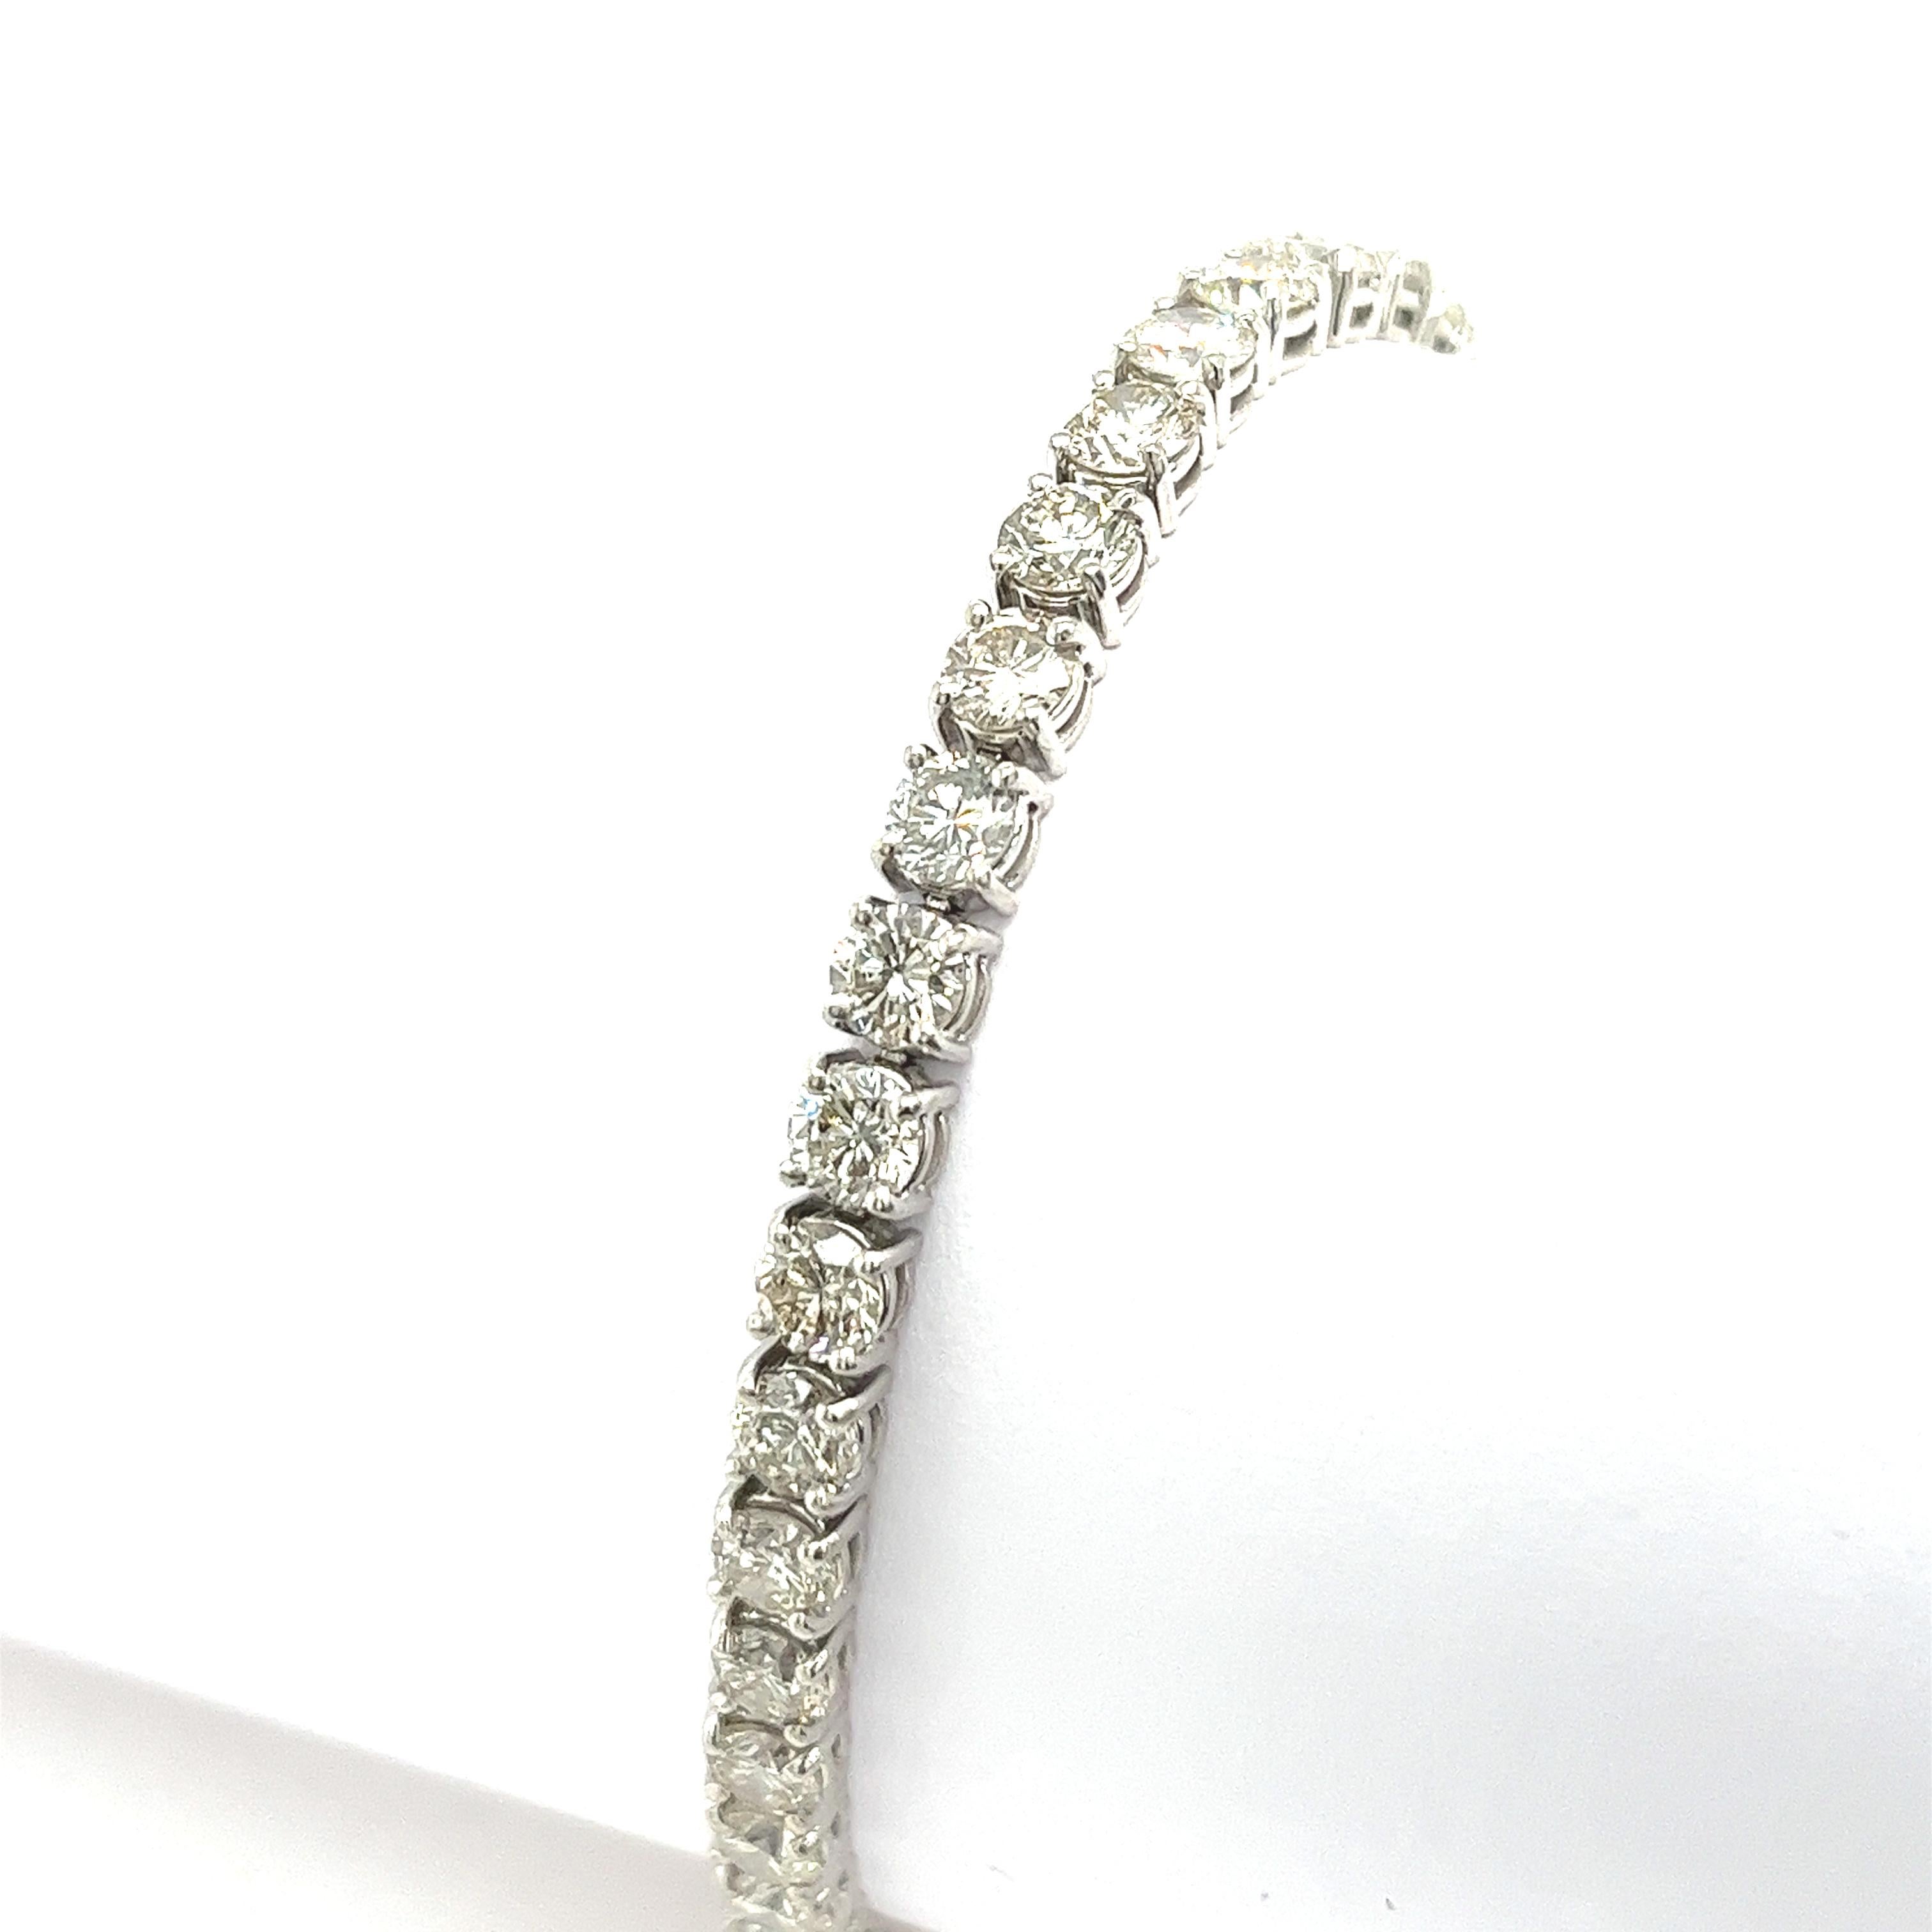 An elegant tennis bracelet that is sure to be a favorite. 
This delicate bracelet is set with a total of 12.0ct diamonds 
that are prong-set across the length of the bracelet in platinum. 
This is a timeless piece that is sure to be a